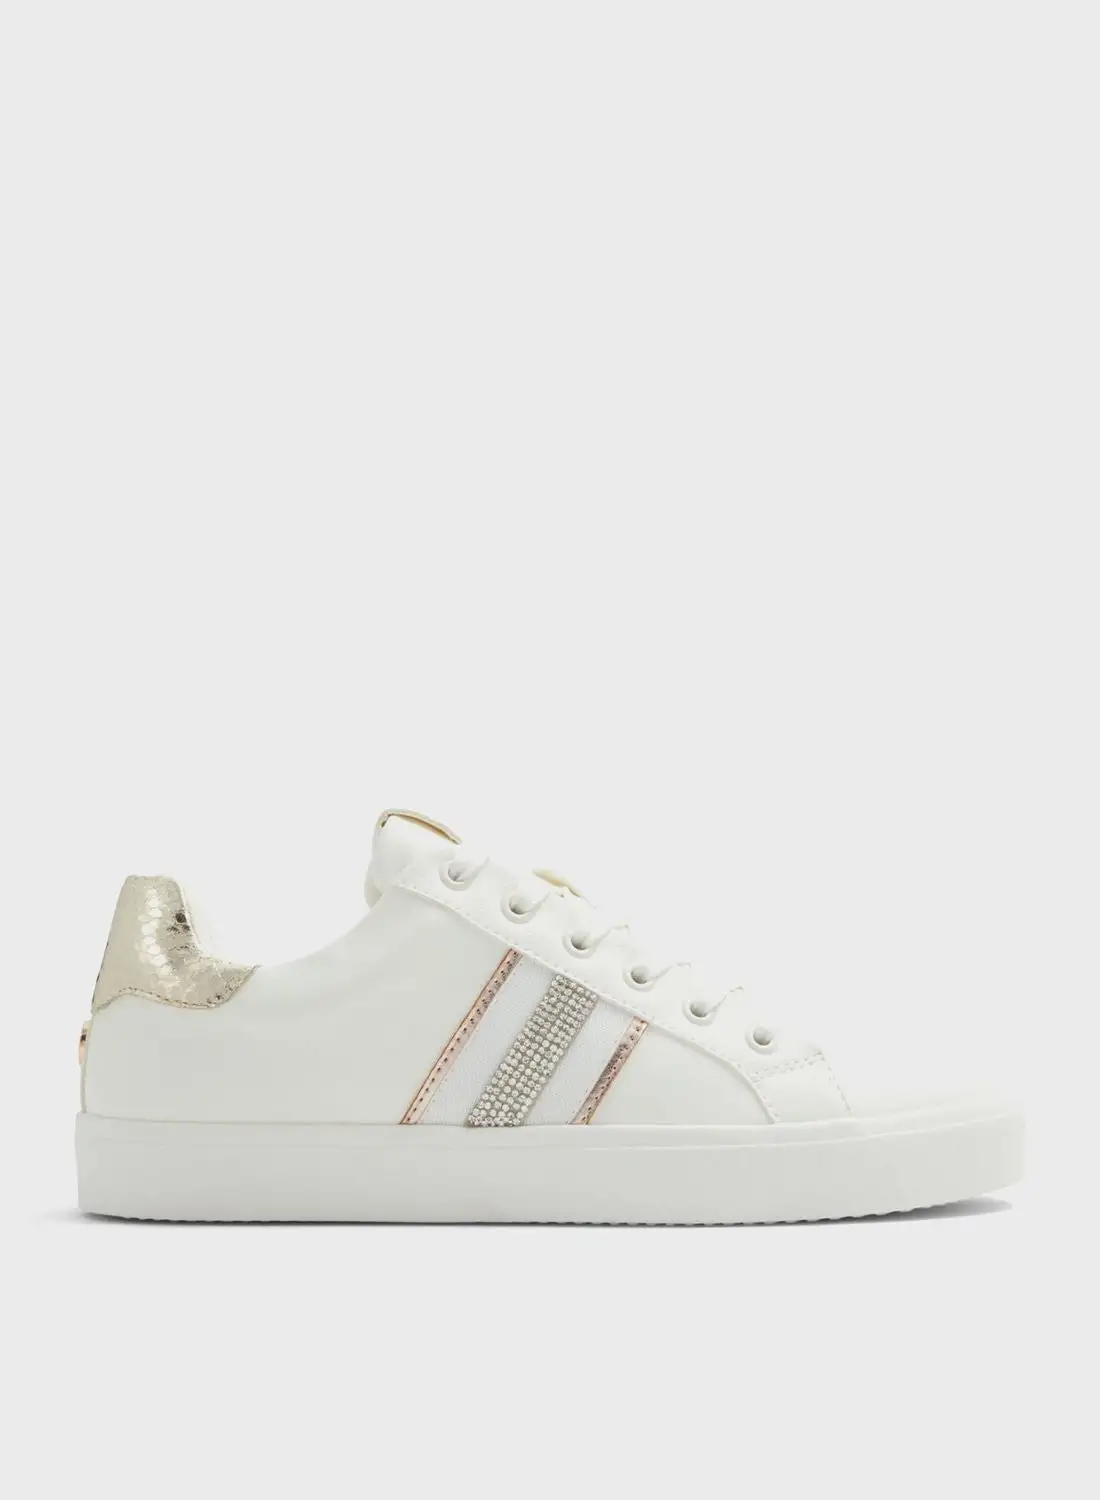 CALL IT SPRING Lizziee Low Top Sneakers